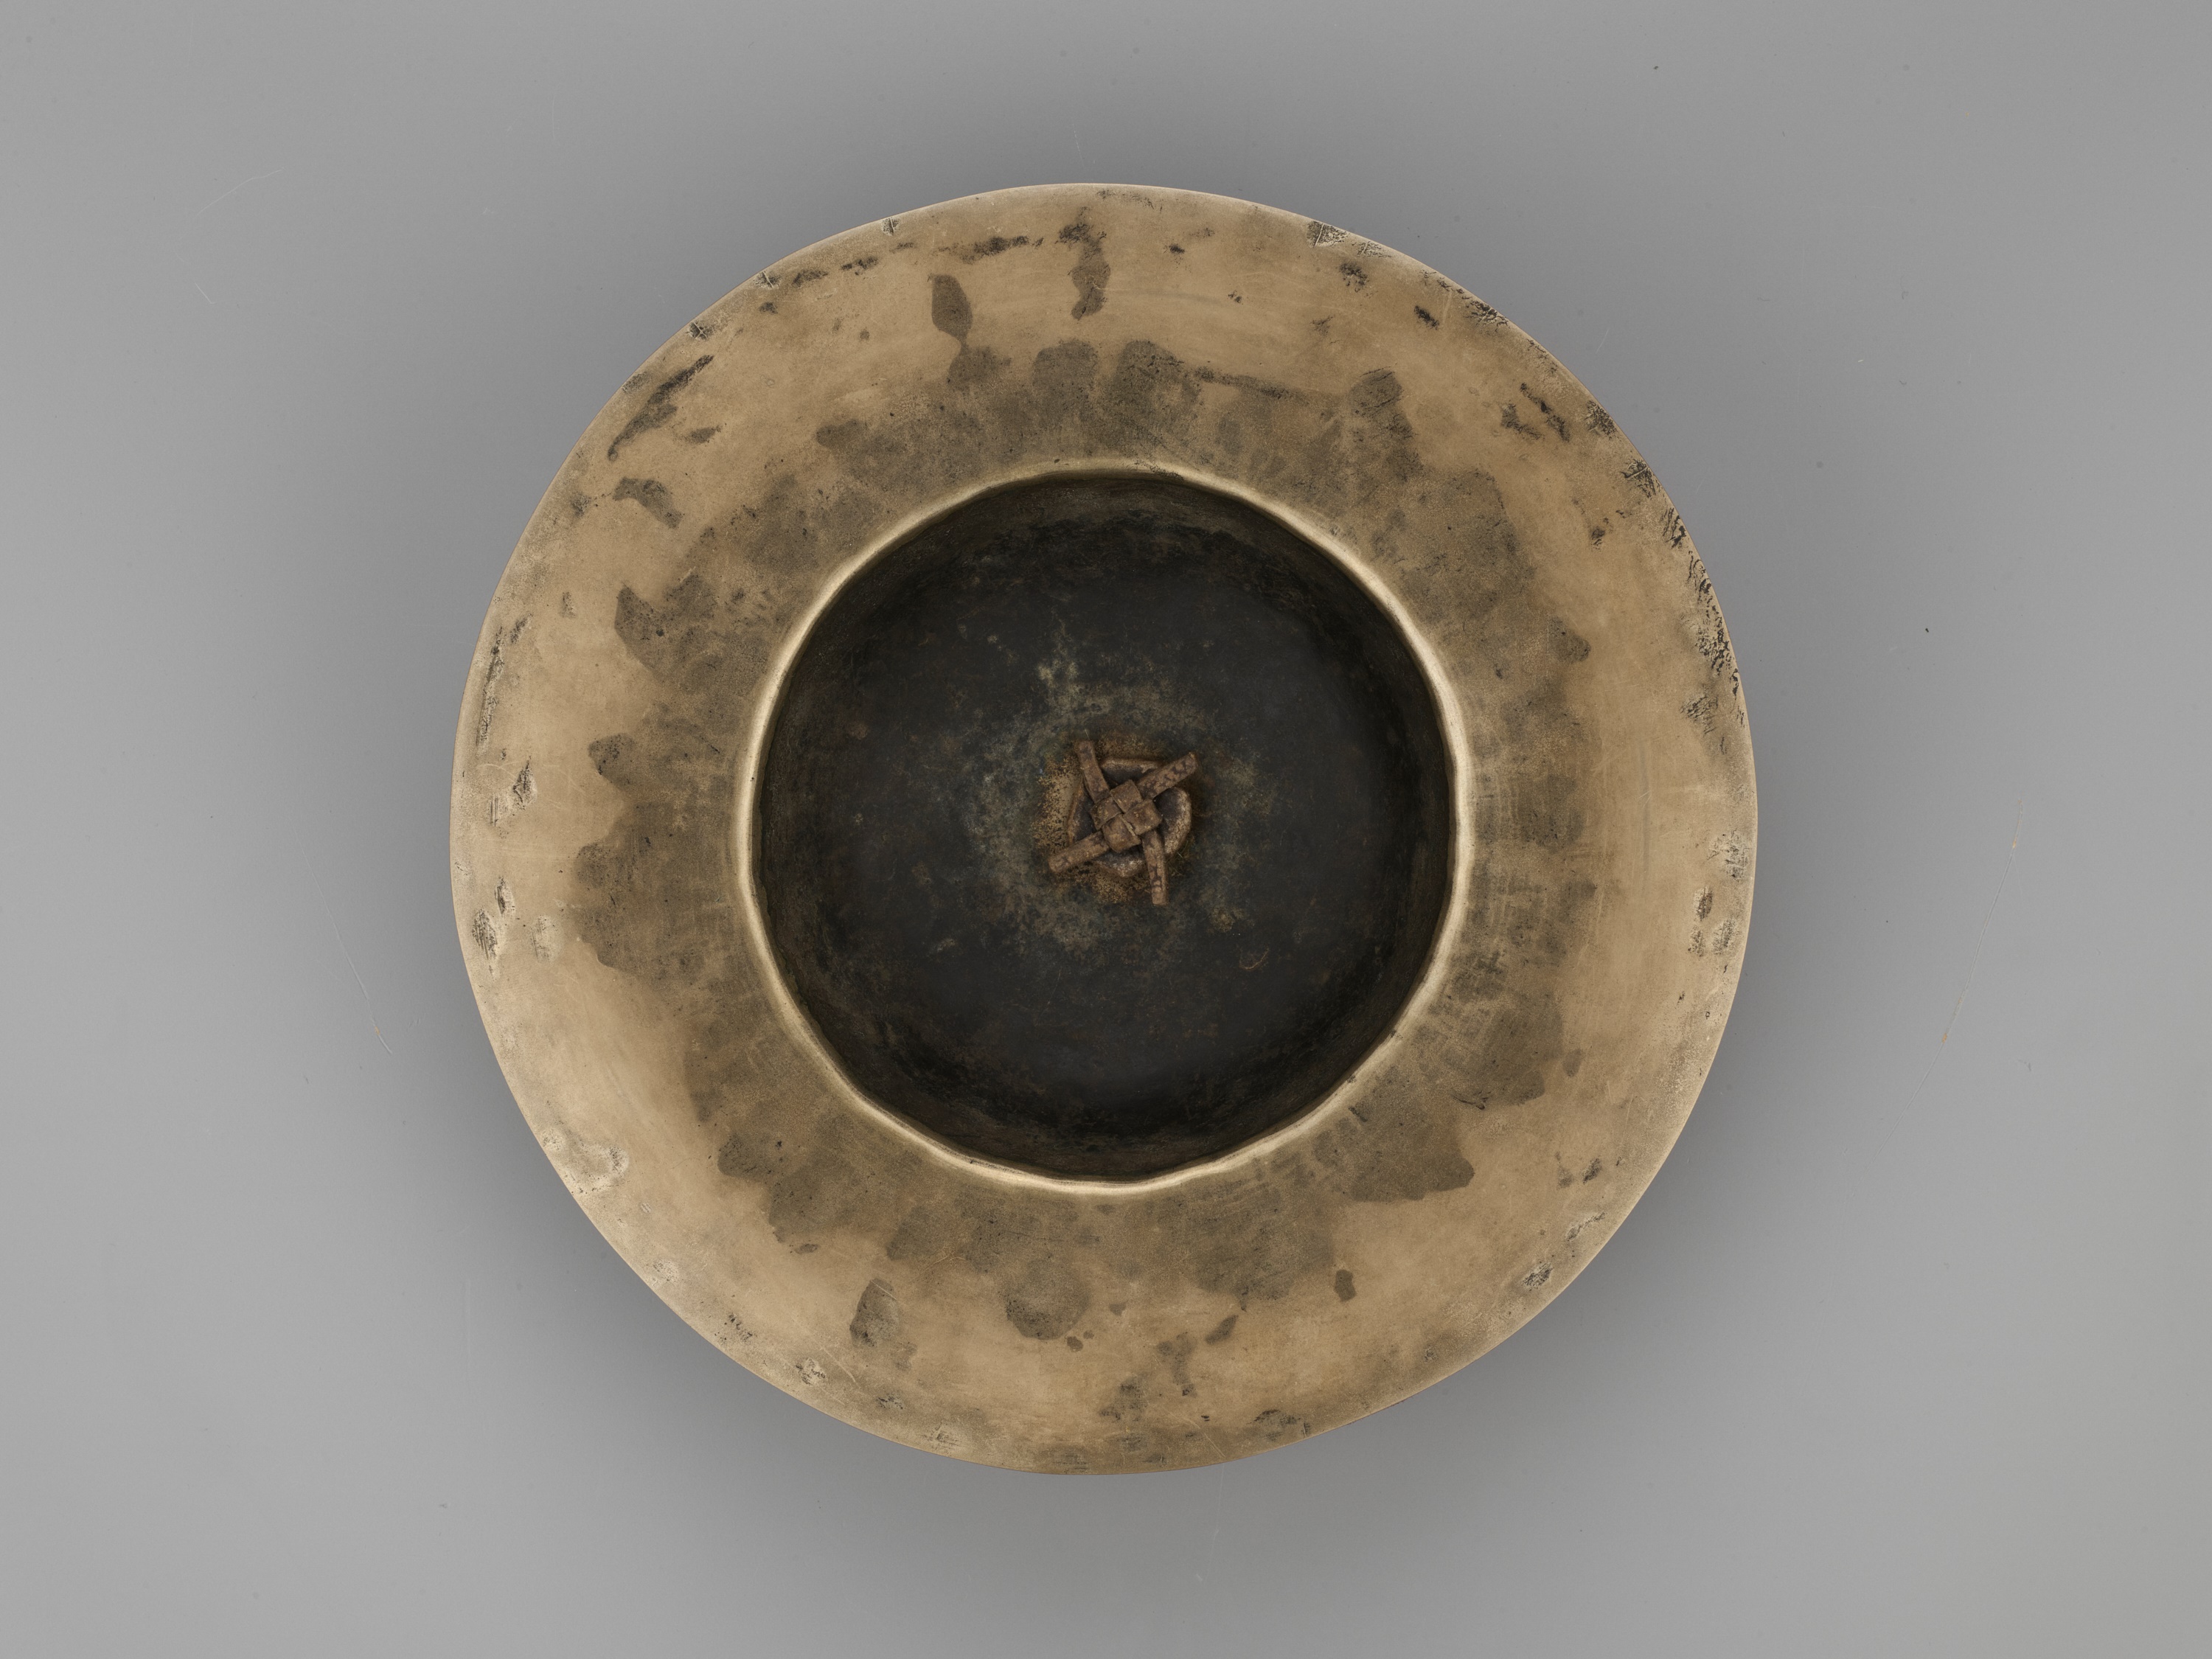 A PAIR OF BRONZE CYMBALS, BO, XUANDE MARK AND PERIOD, DATED 1431 - Image 13 of 18